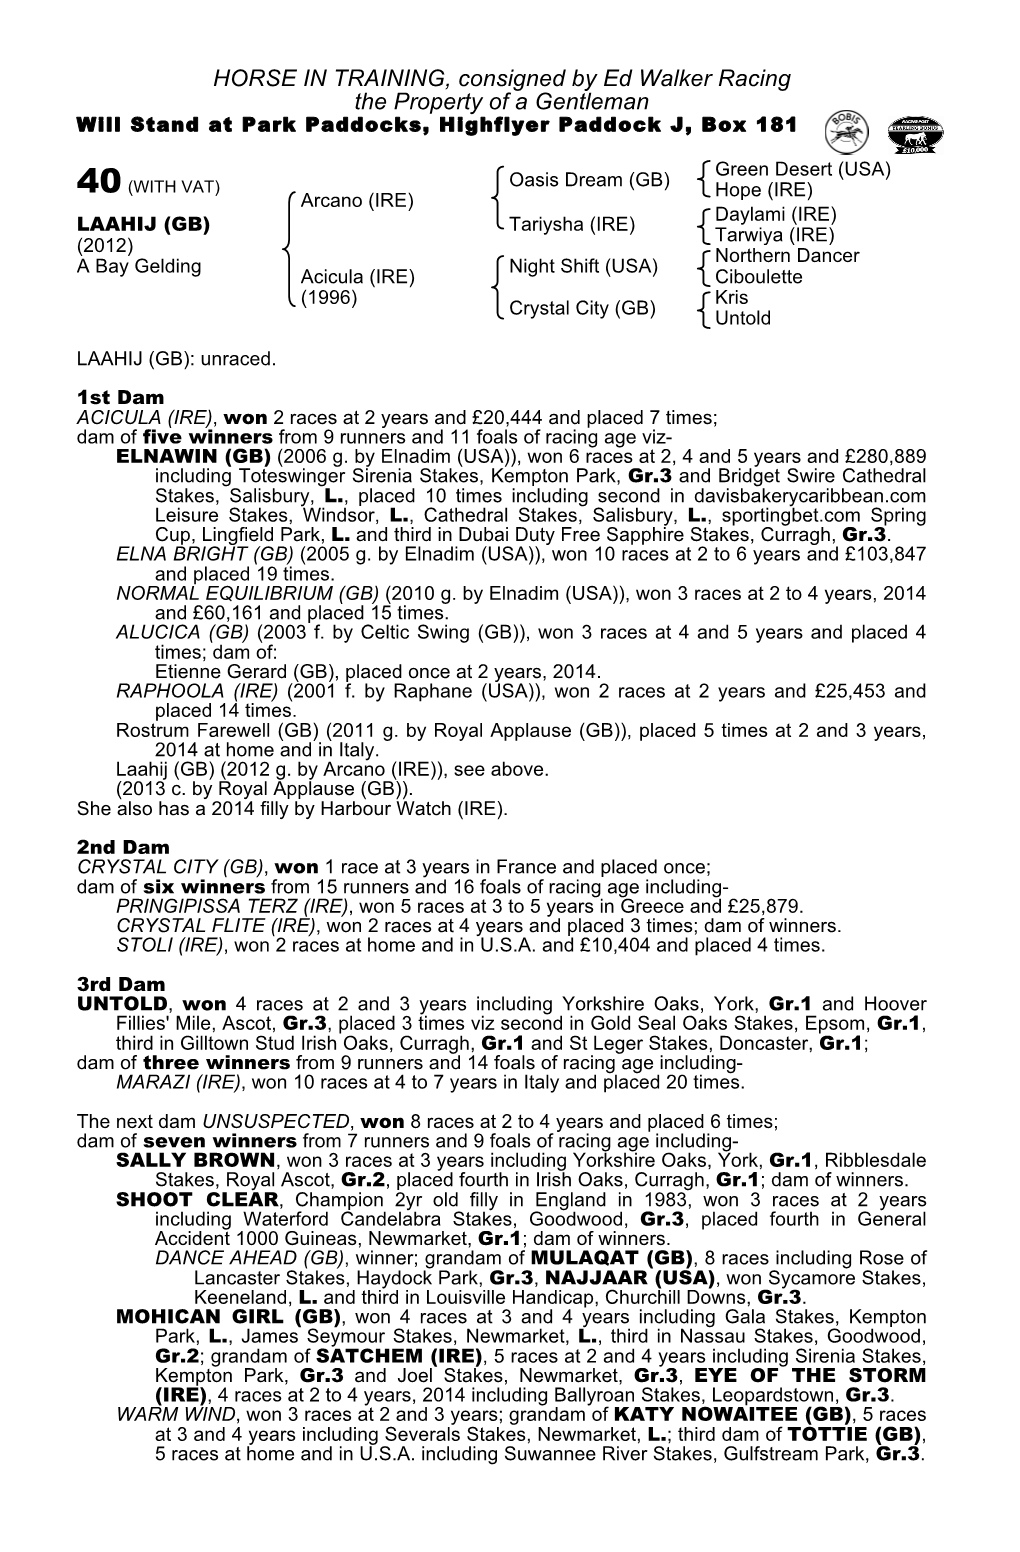 HORSE in TRAINING, Consigned by Ed Walker Racing the Property of a Gentleman Will Stand at Park Paddocks, Highflyer Paddock J, Box 181